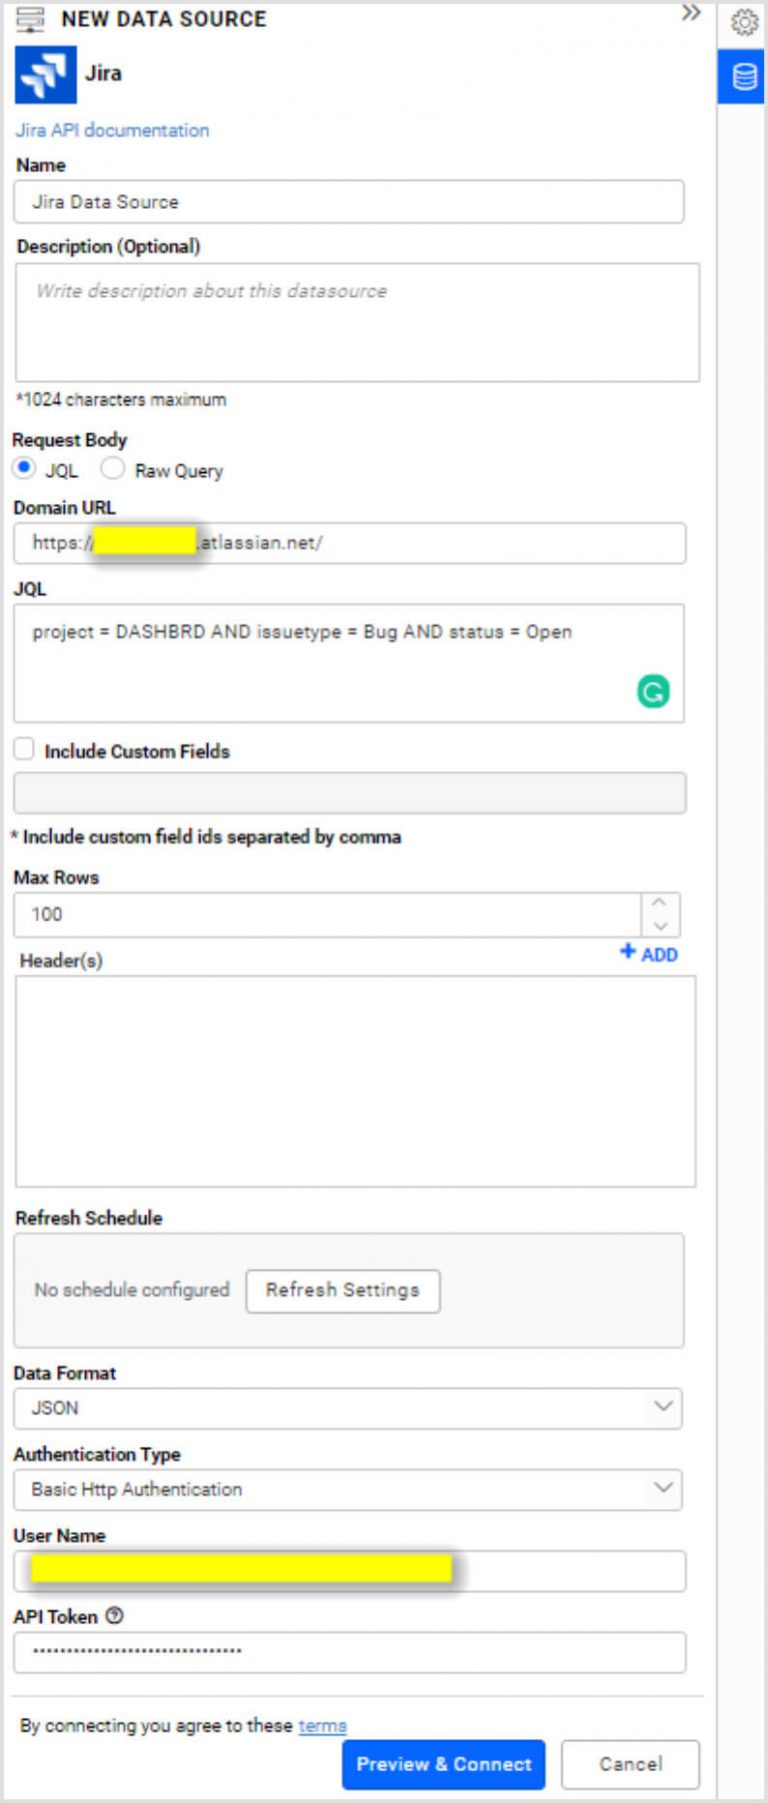 Create data source window for Jira connection with required fields filled